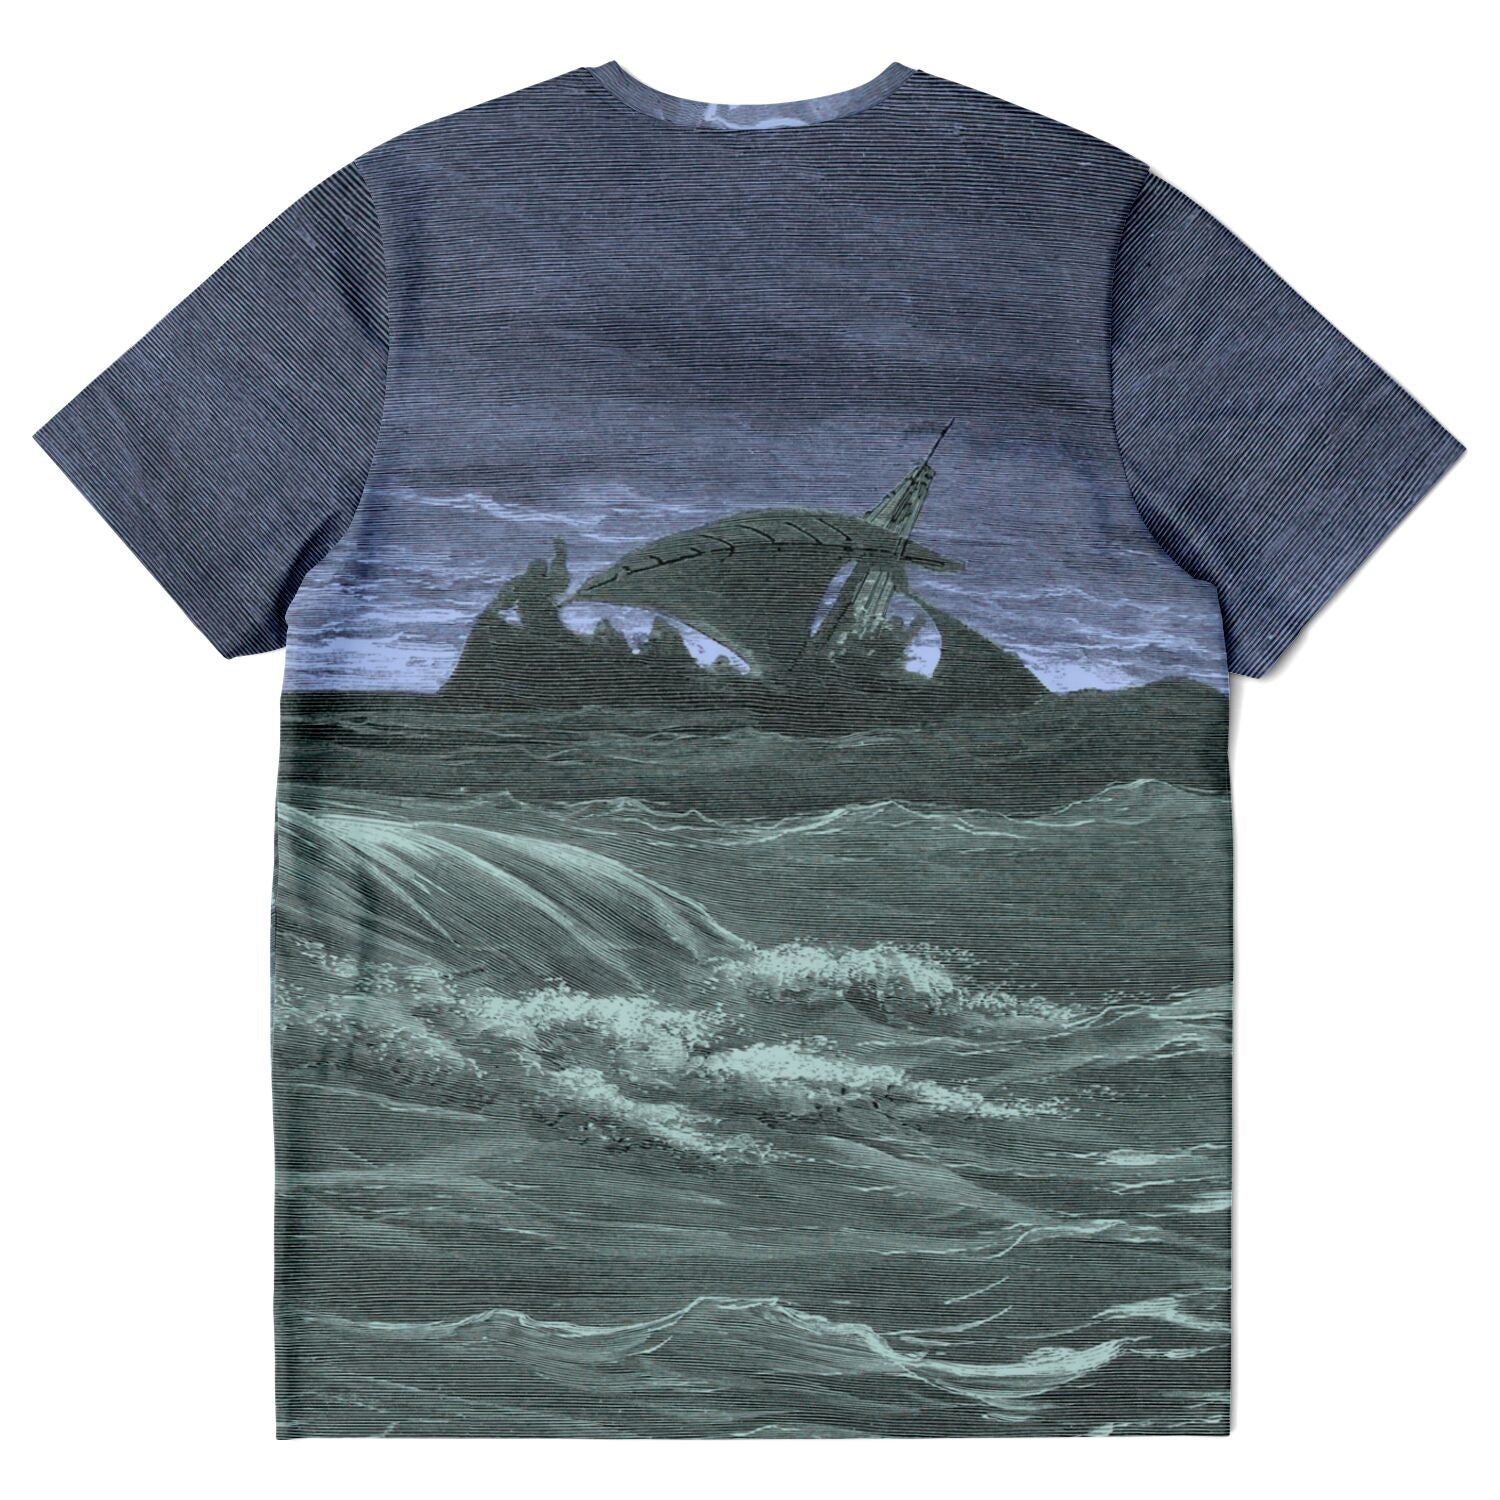 T-shirt XS The Monkey and the Dolphin by Gustave Dore | Nautical Ocean Sea Marine Life Graphic Art T-Shirt